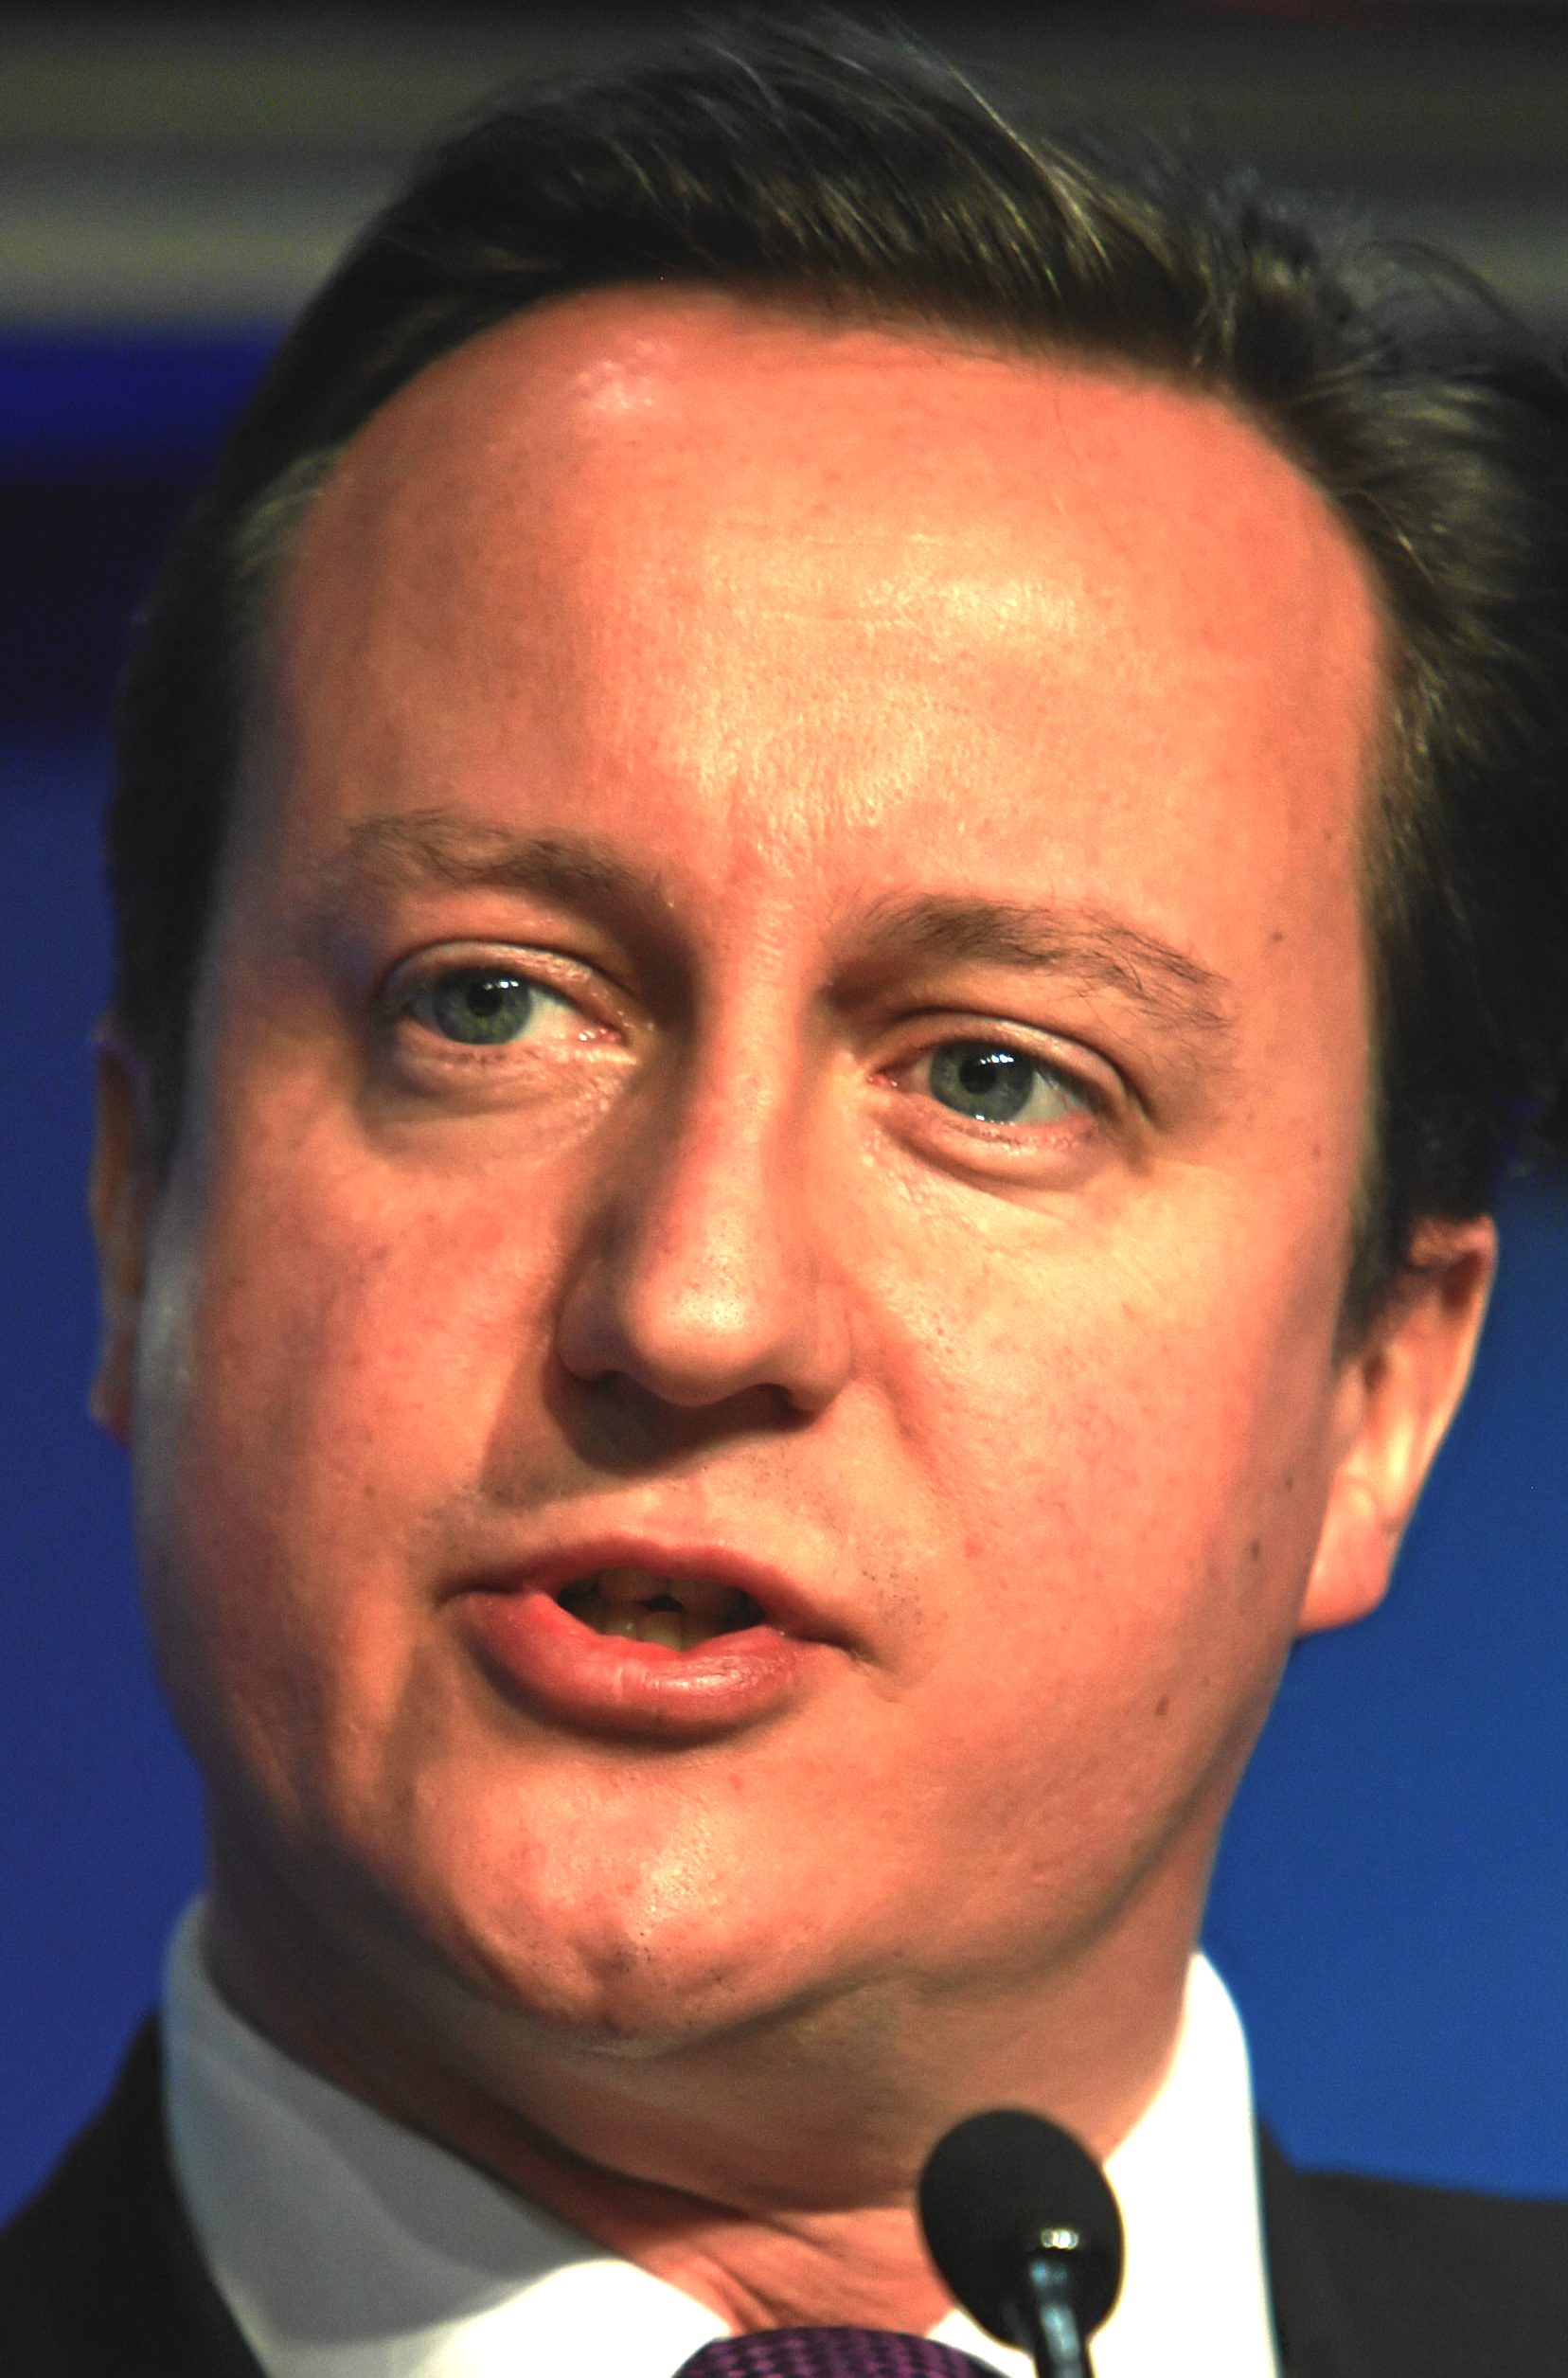 David Cameron prime minister of England, United Kingdom party politics and unsustanability, povery and financial slavery